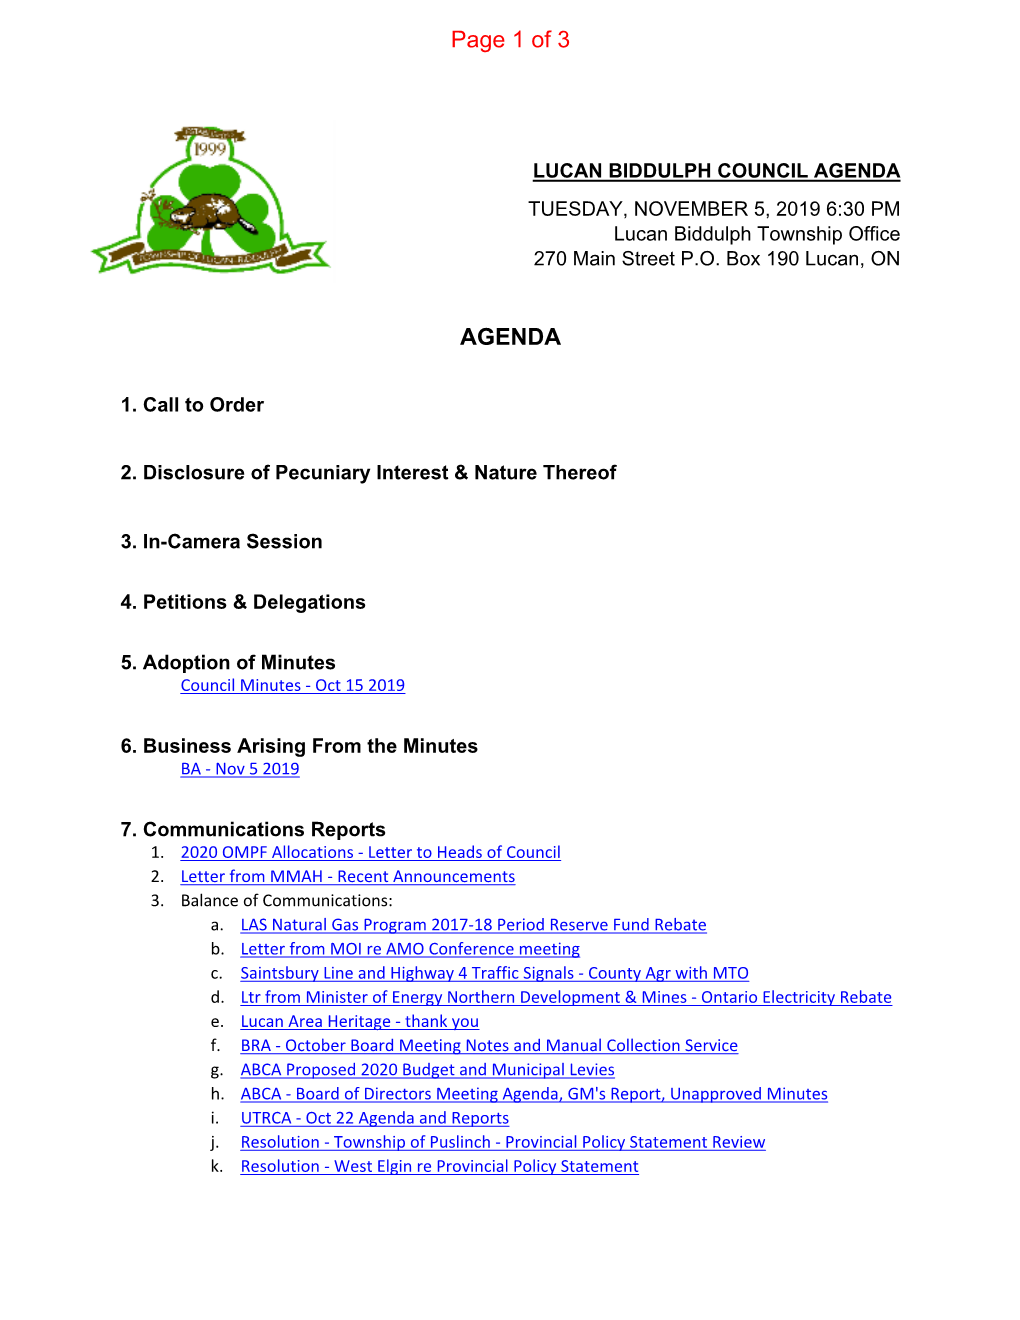 AGENDA Page 1 of 3